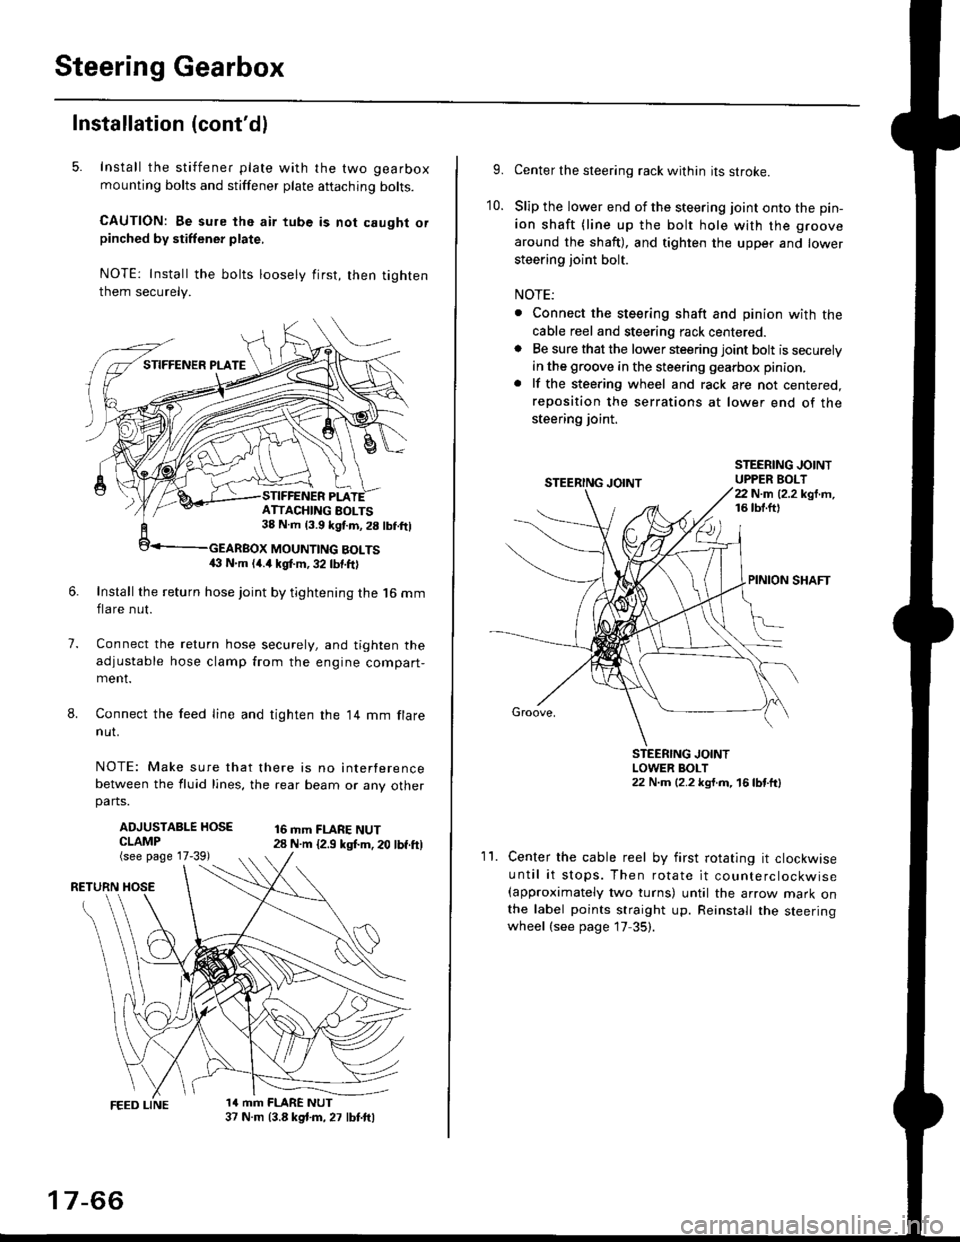 HONDA CIVIC 1997 6.G Workshop Manual Steering Gearbox
Installation (contdl
5. Install the stiffener plate with the two gearbox
mounting bolts and stiffener plate aftaching bolts.
CAUTION: Be sure the air tube is not caught orpinched by 